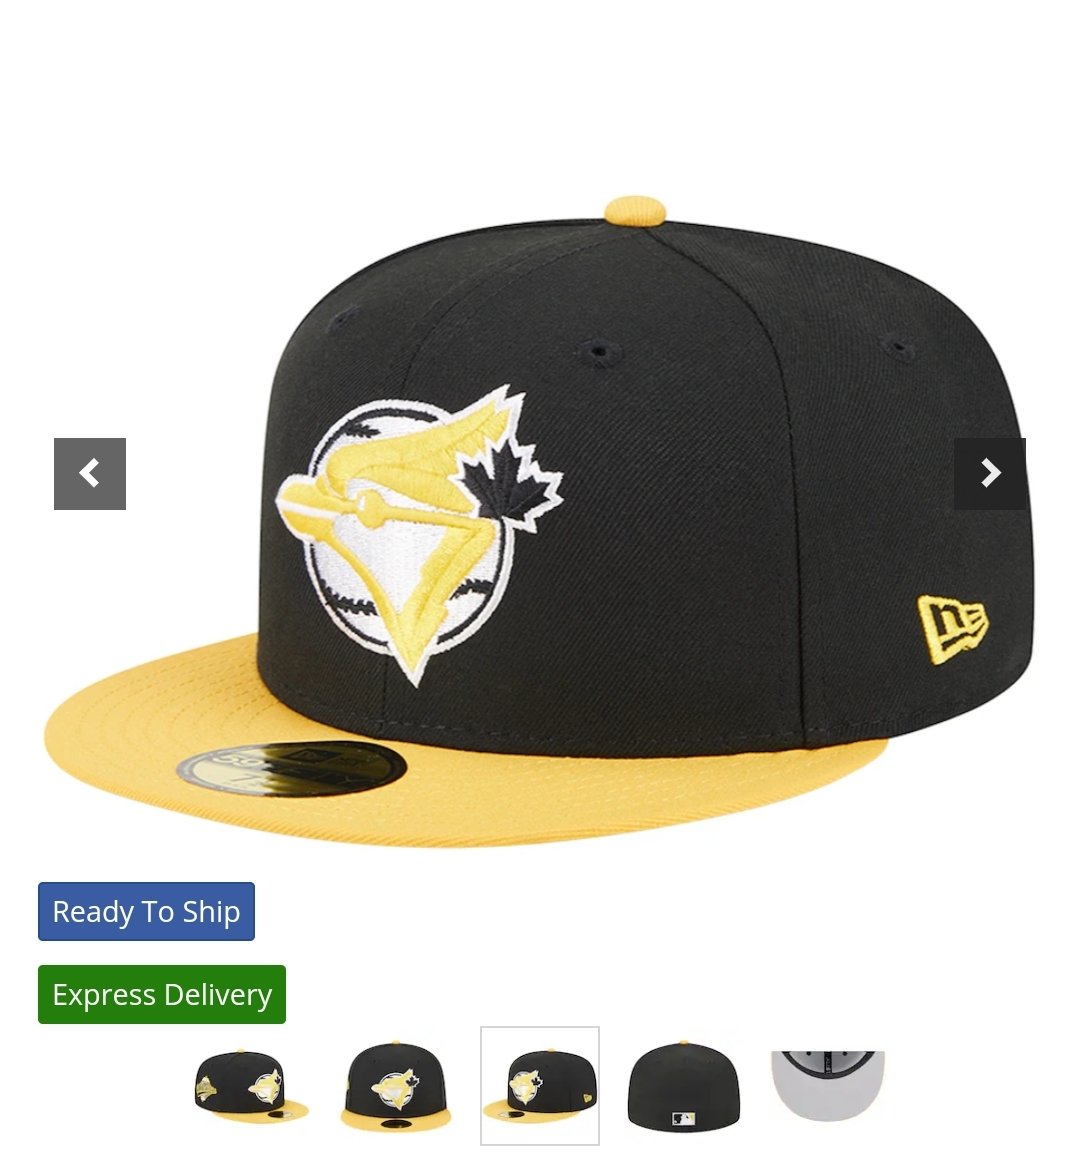 A Blue Jays hat in Pittsburgh colours? Perfect! But there's a 0% chance I'm ordering it from Fanatics because @FanaticsSucks @NewEraCap Where can I buy this hat in person? I'll drive to HQ in Buffalo if I need to